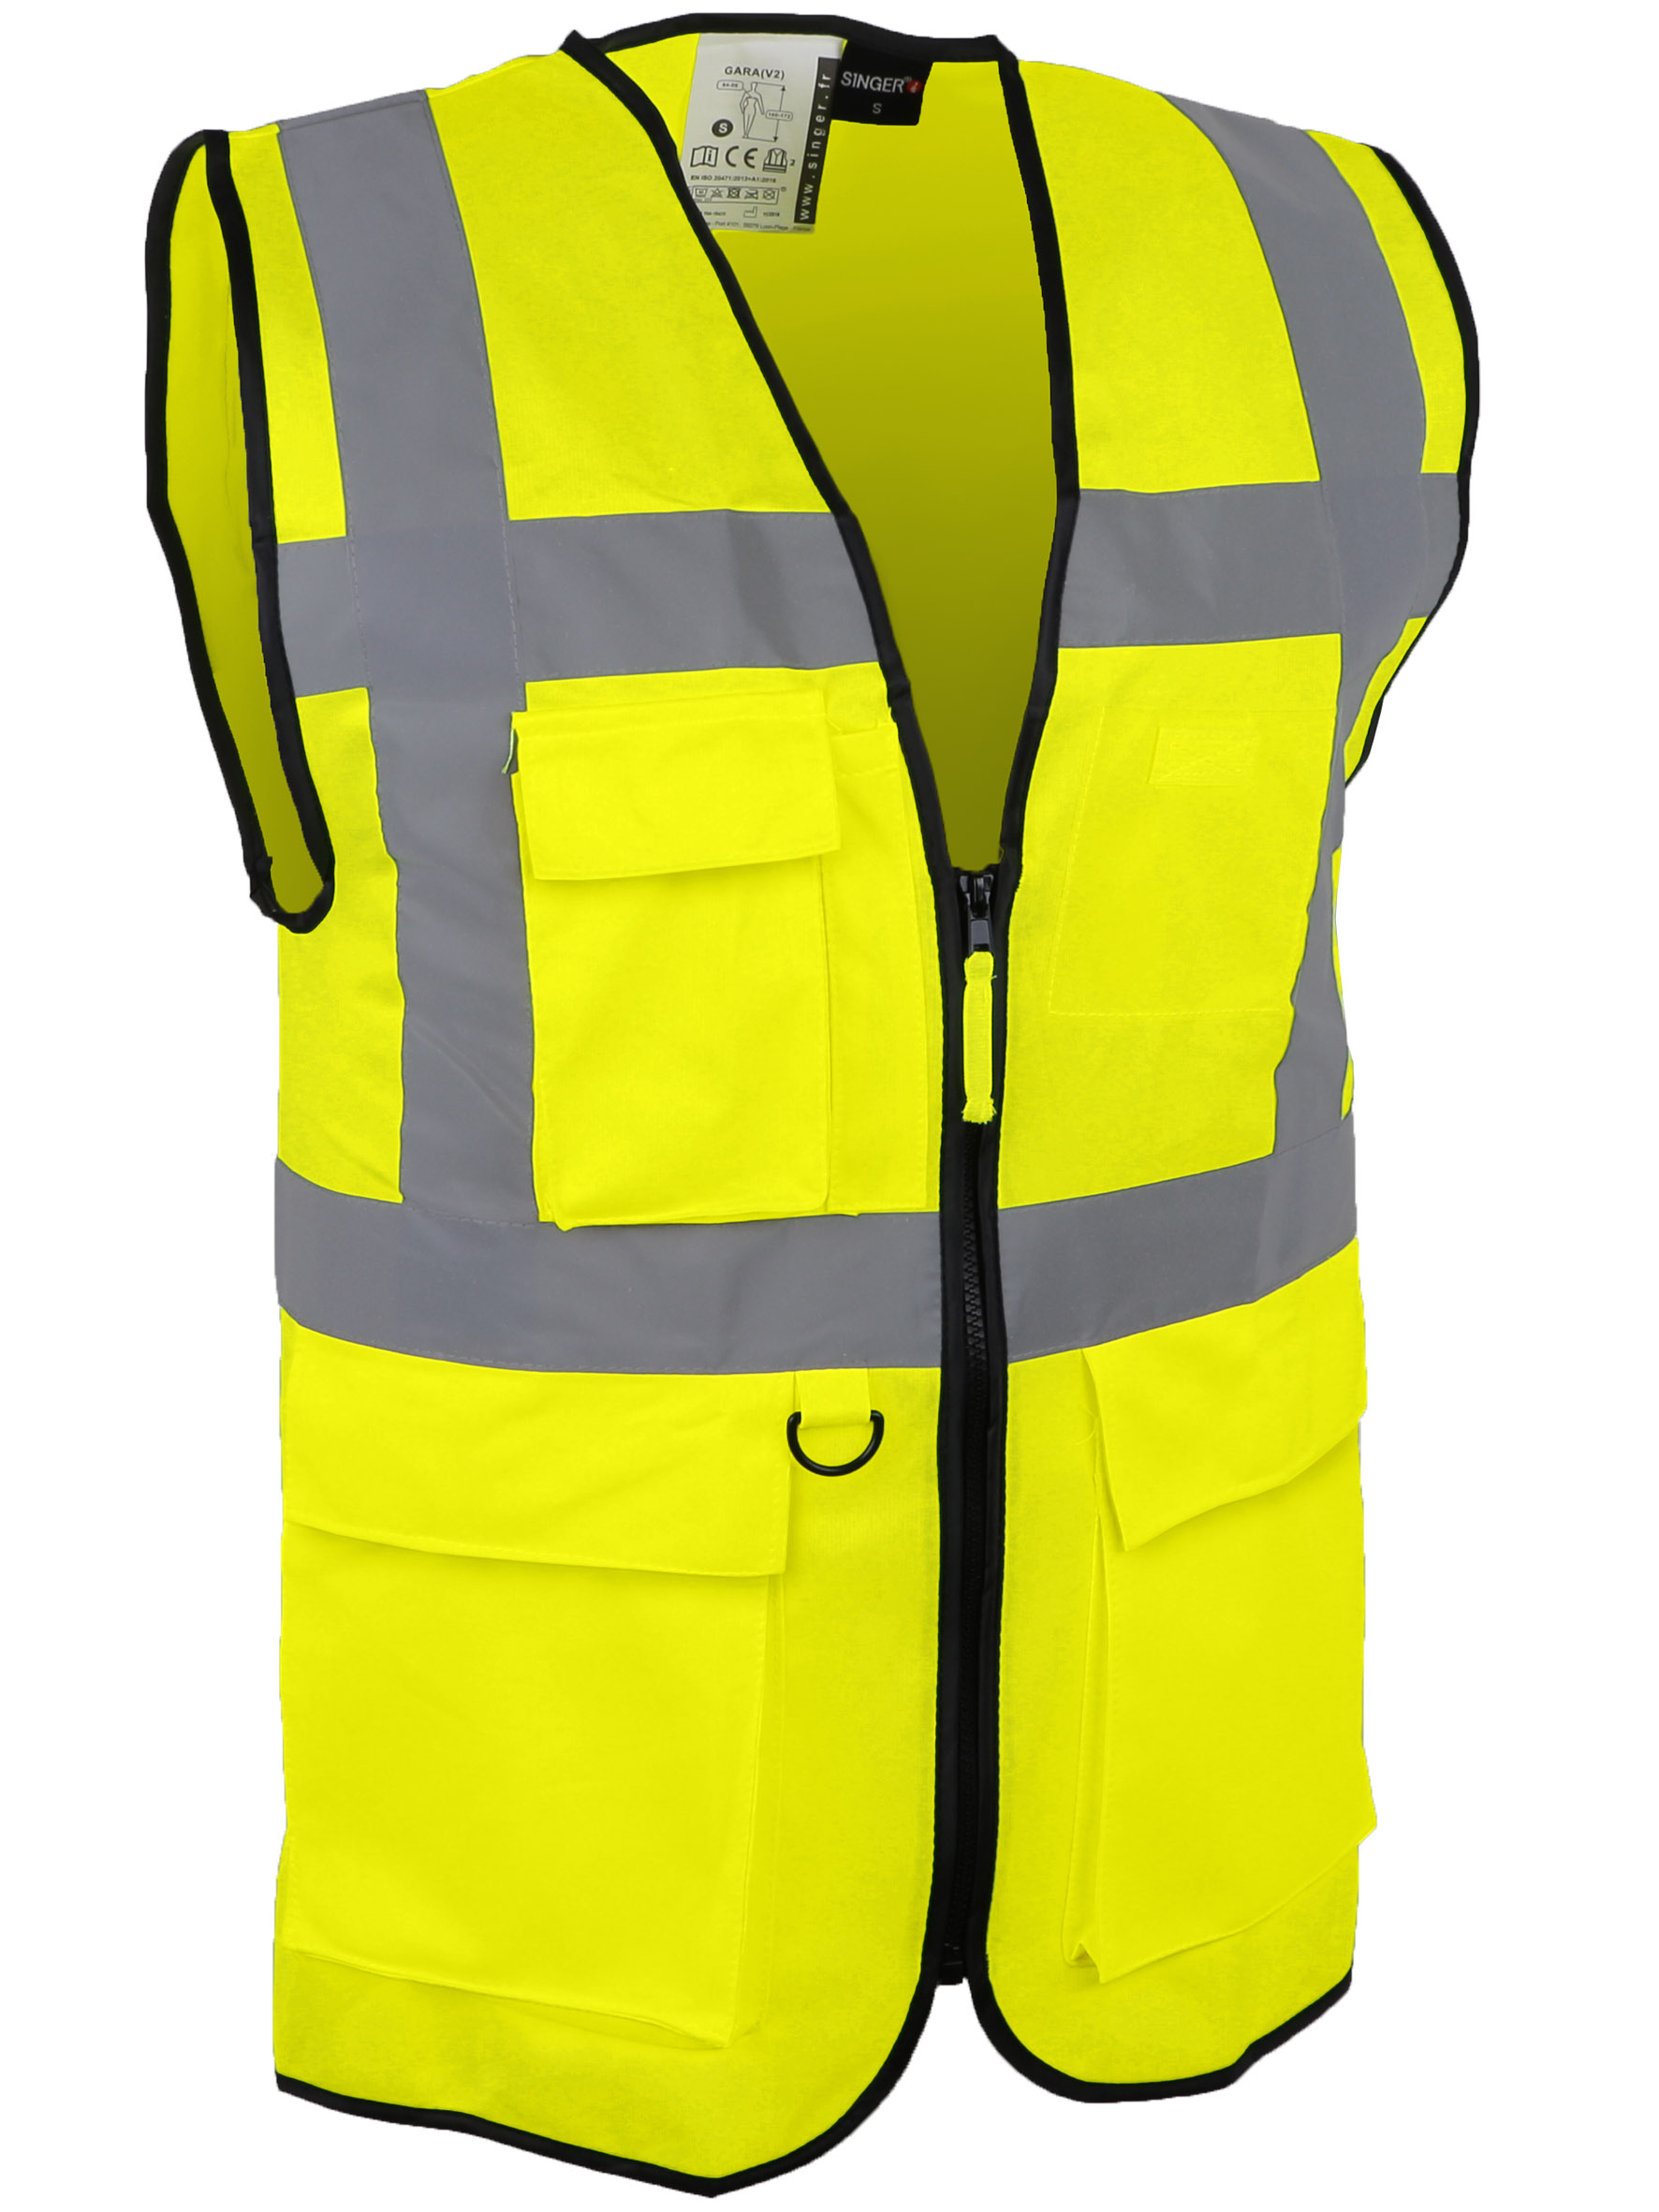 Article - Gilet de signalisation. Polyester. Multi-poches.